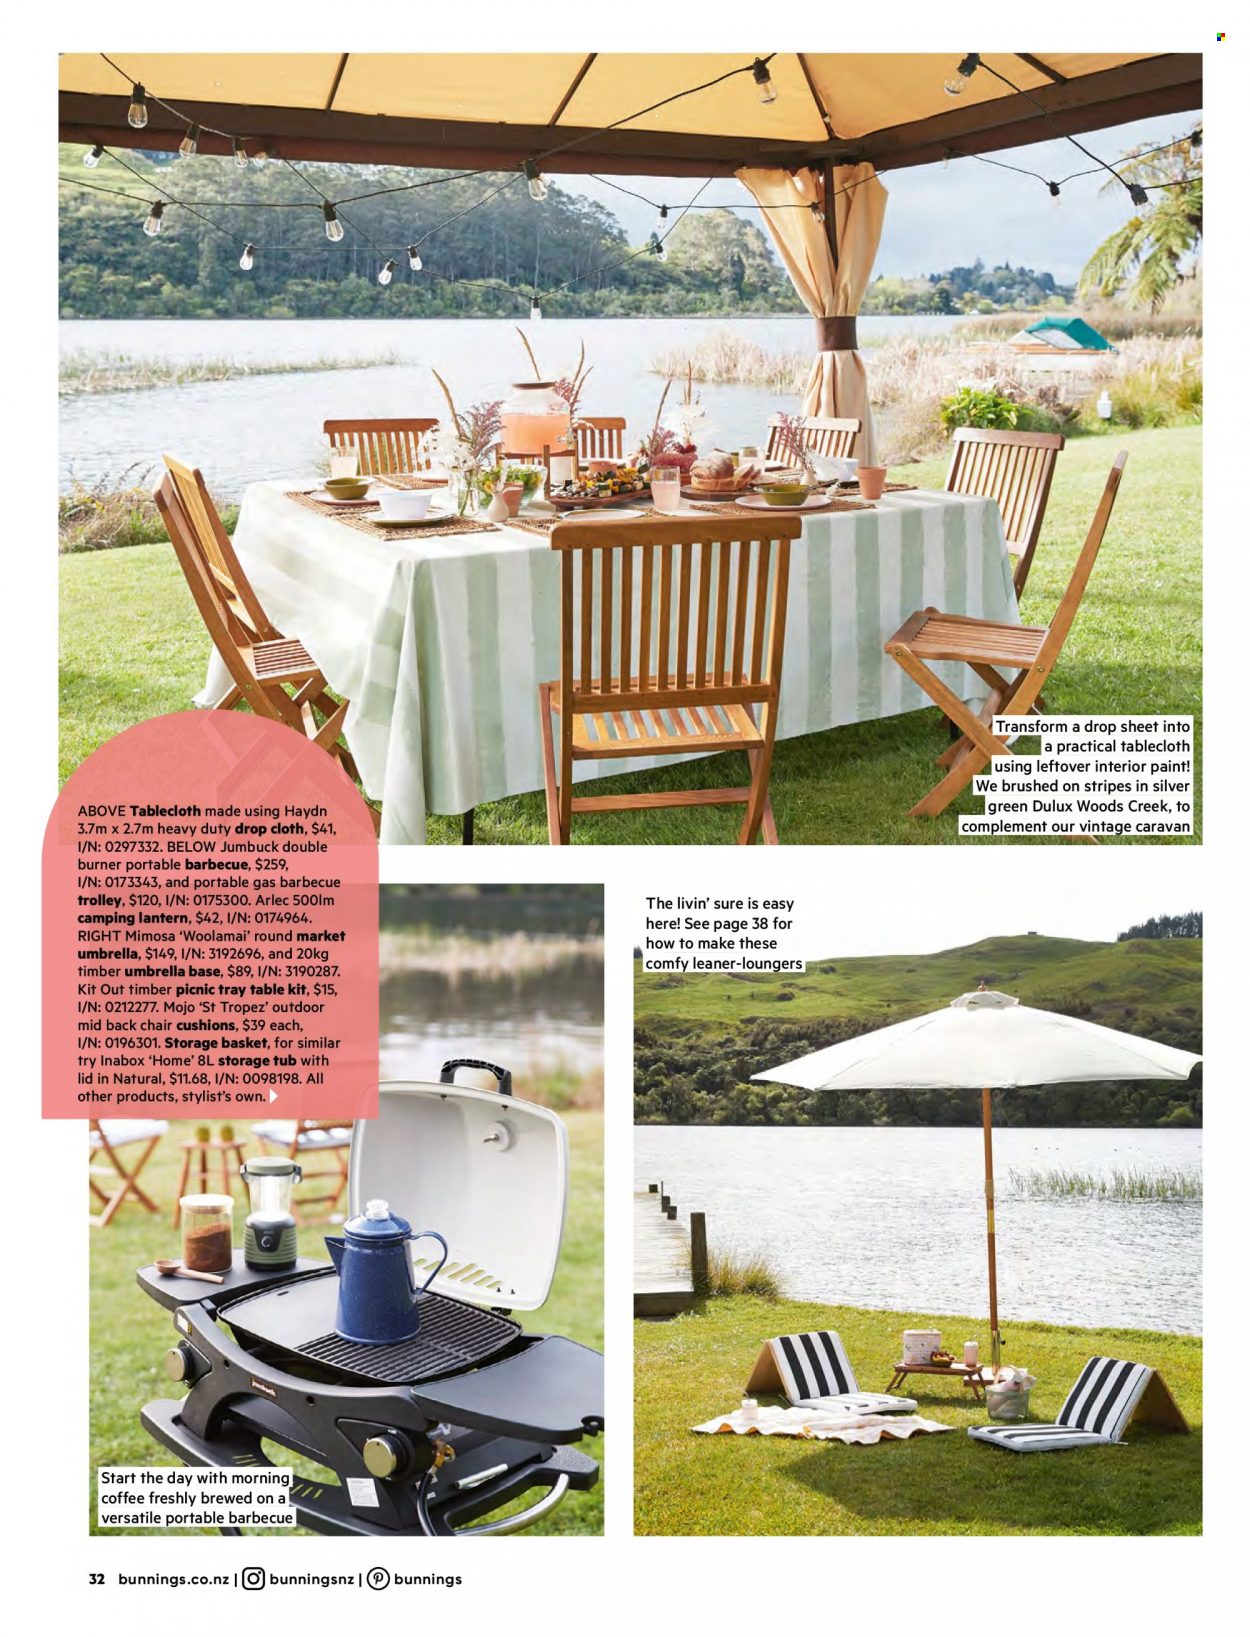 thumbnail - Bunnings Warehouse Catalogue - Sales products - trolley, table, chair, cushion, lantern, chair pad, tablecloth, storage basket, plastic drop sheet, paint, Dulux, umbrella, basket, portable barbecue. Page 32.